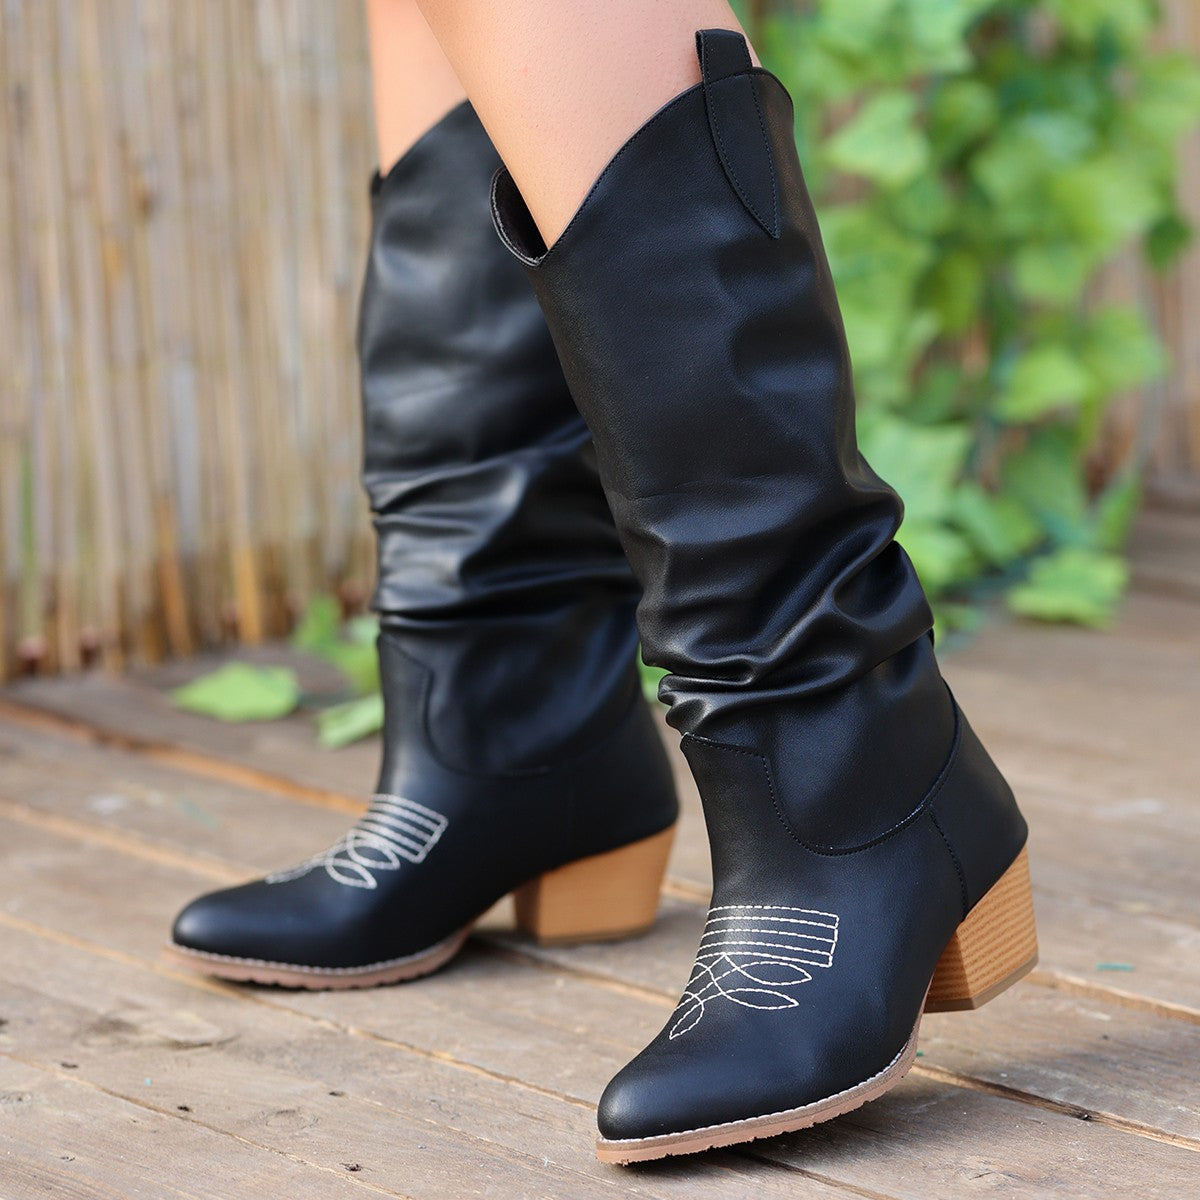 Women's Cayla Black Leather Heeled Boots - STREETMODE™